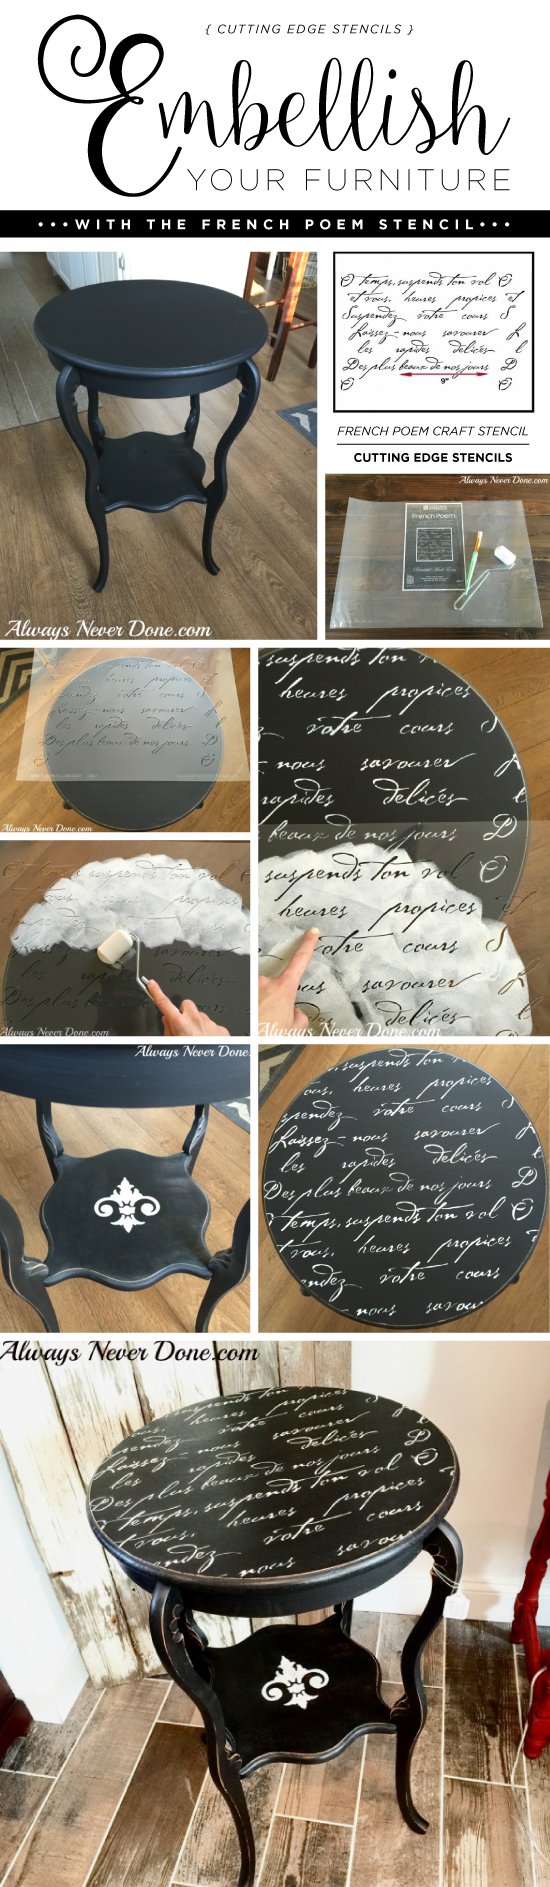 Cutting Edge Stencils shares a DIY side table makeover using the French Poem Craft Stencil and Chalk Paint. http://www.cuttingedgestencils.com/french-poem-diy-craft-stencil-design.html